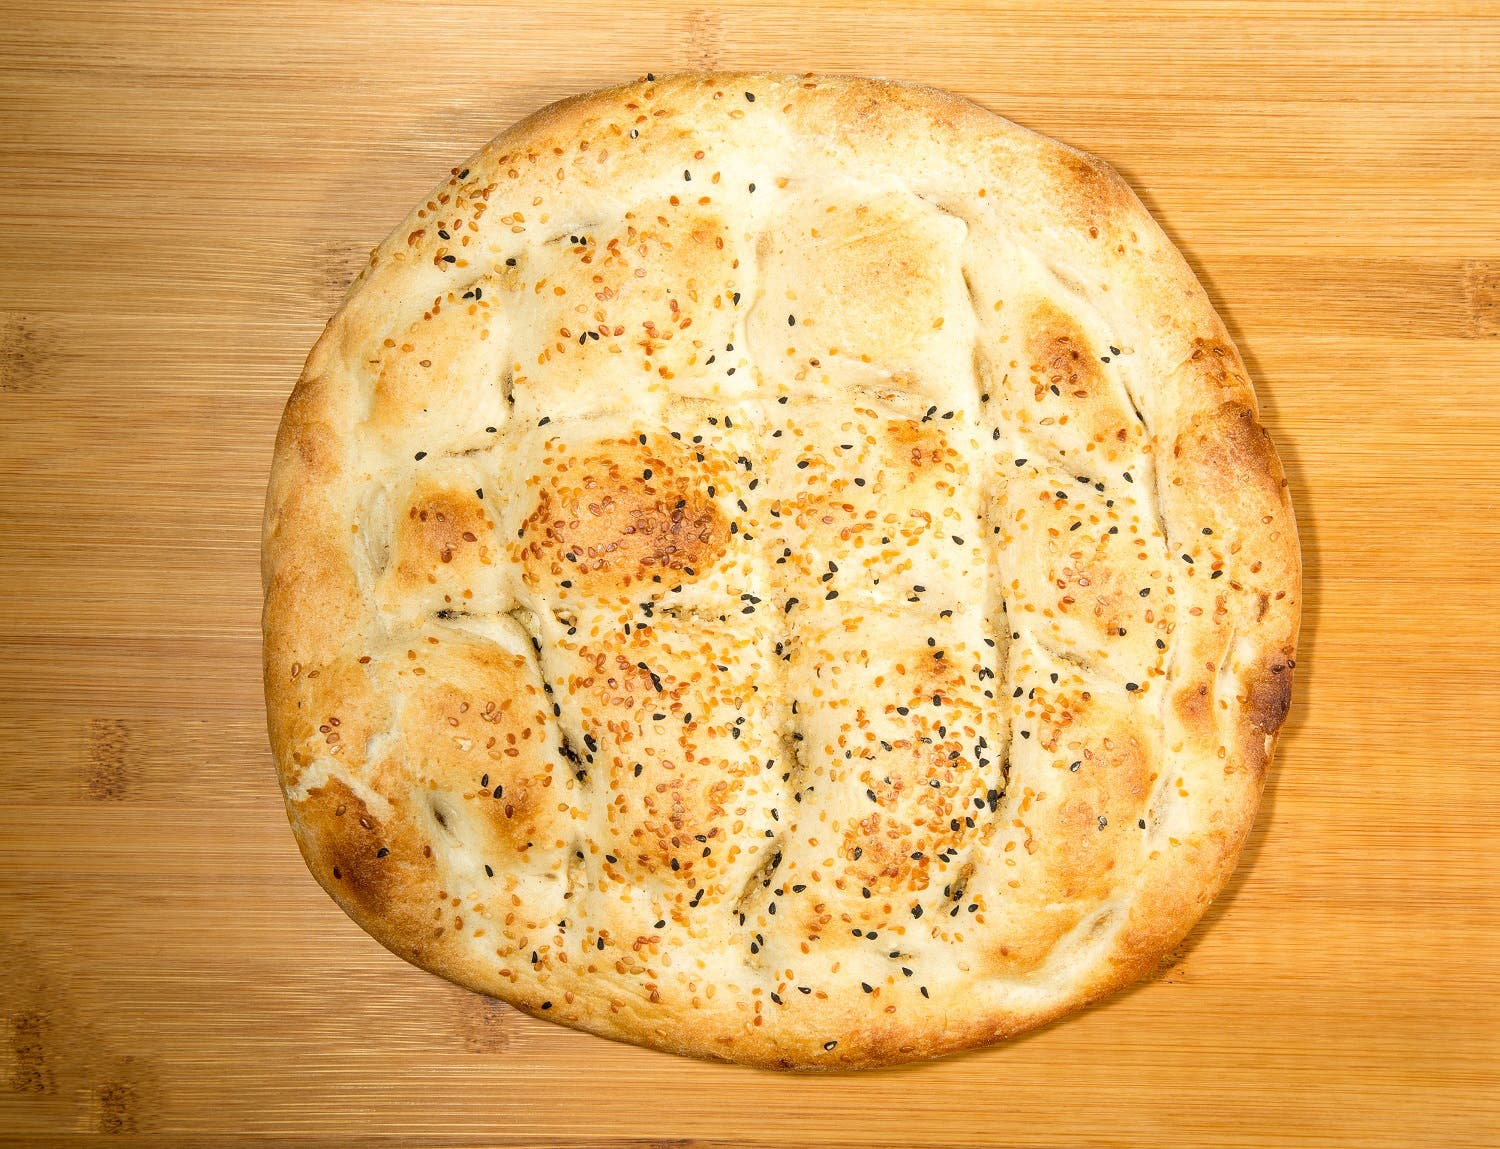 Turkish bread, or known locally as Pide Ekmeği, is a thick flat bread used with kababs and stew dishes. (Shutterstock)